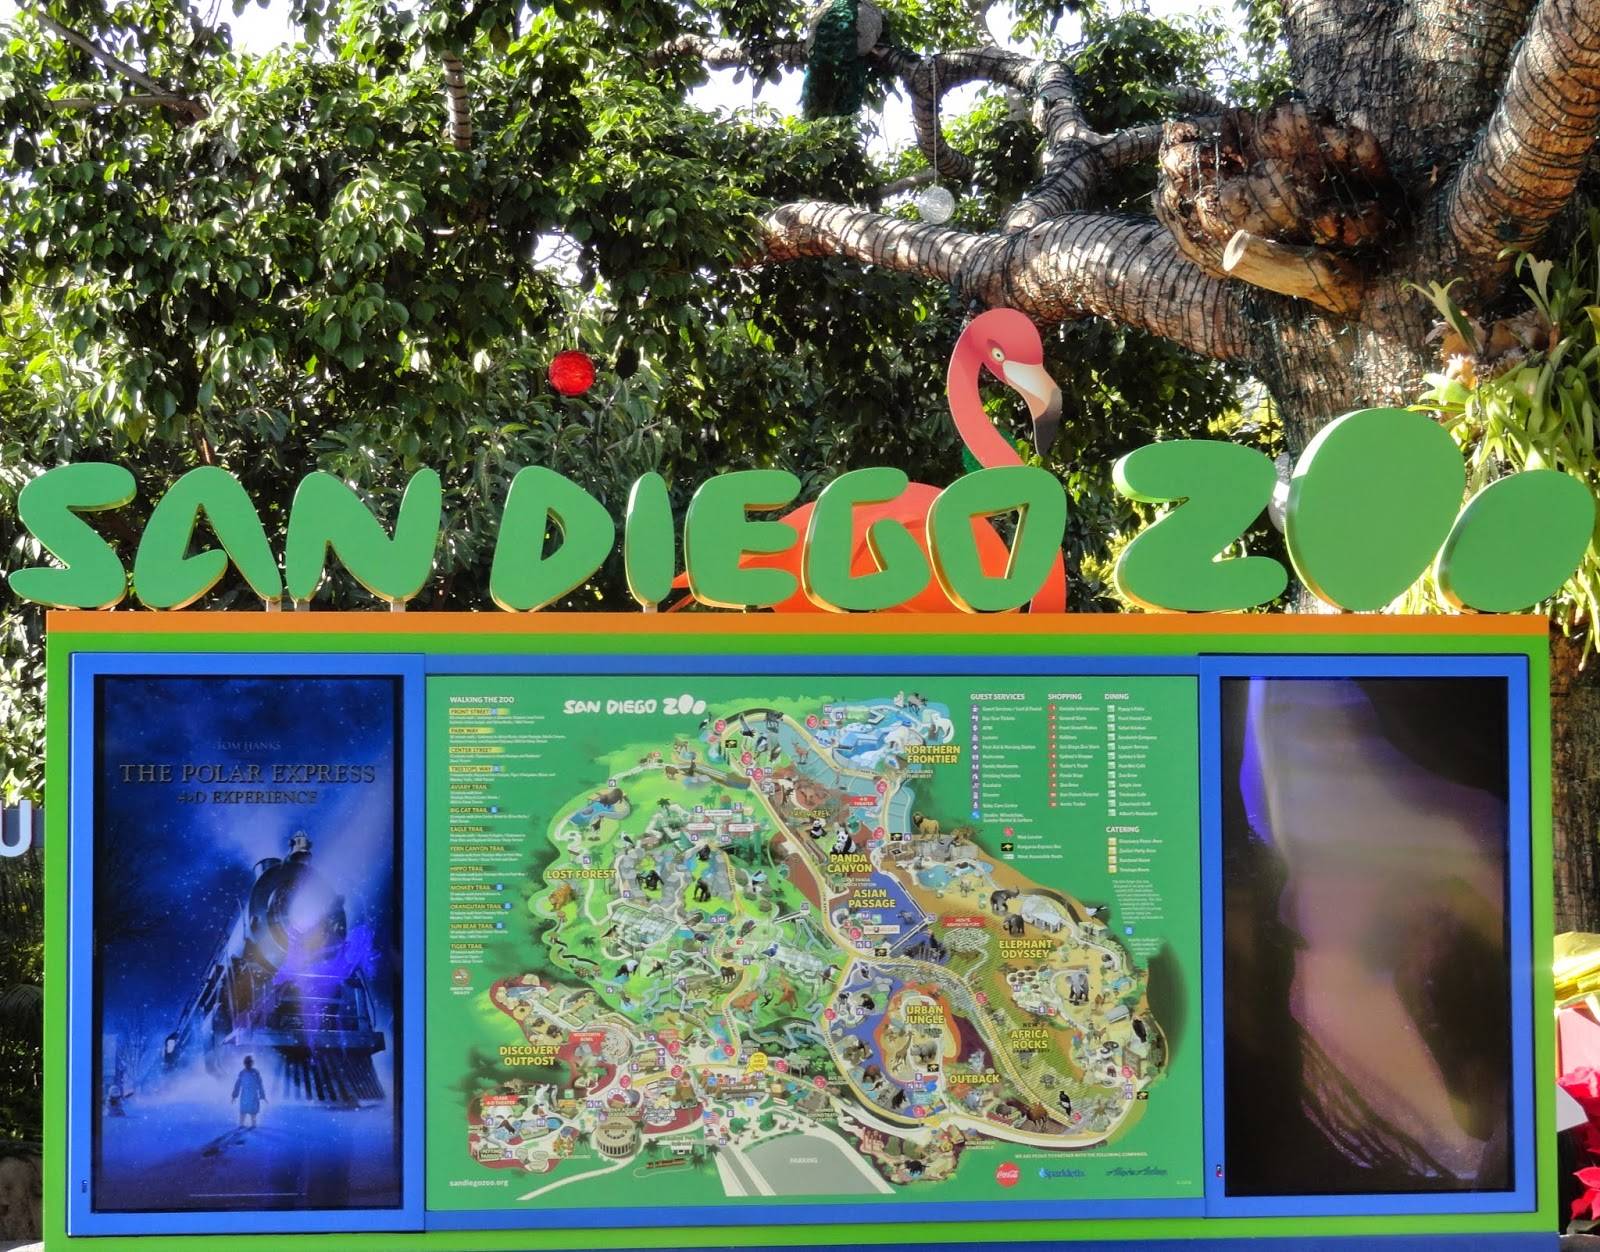 San Diego is the right place for you who want to have a family vacation at the end of the year